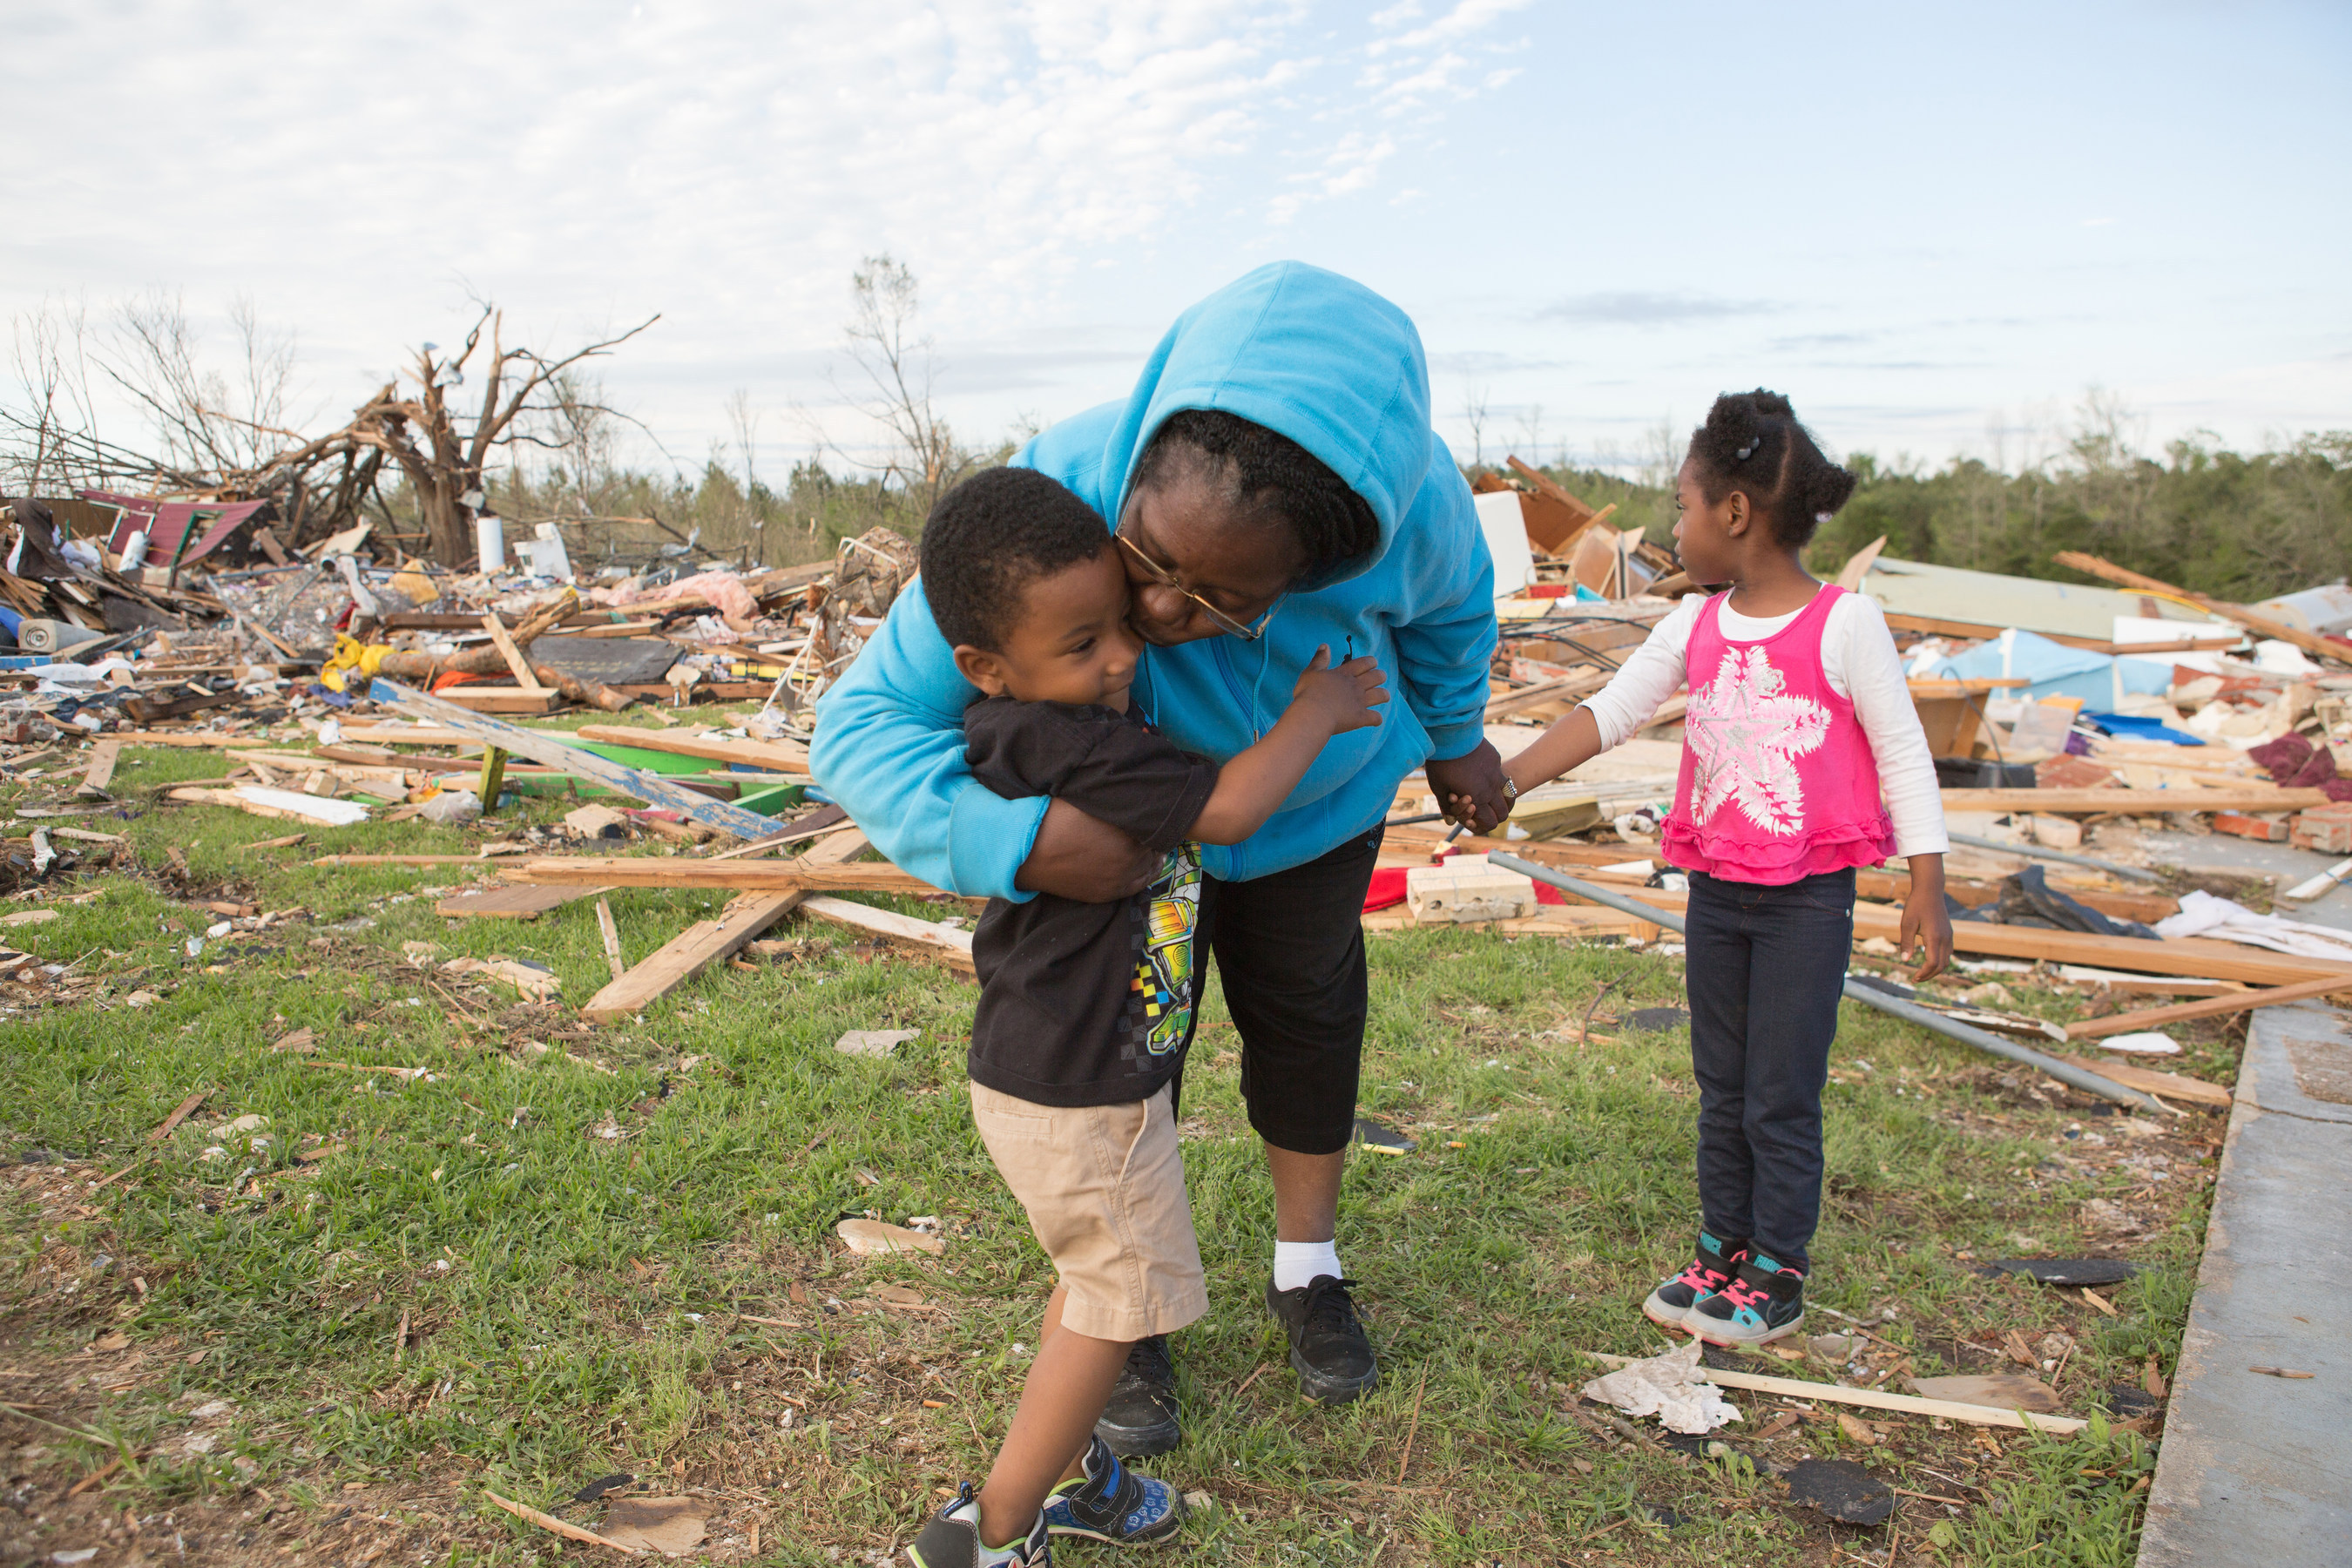 Destiny's Daycare Director Deborah Holmes comforts her Jaquan, 3 and Breanna, 5, after an April 2014 tornado destroyed their Louisville, Miss. child care center. Mississippi is one of 31 states that currently meet three child care emergency planning standards tracked by Save the Children annually. A new federal law means 19 lagging states will also need to meet the standards. Credit: Amie Vanderford/Save the Children.